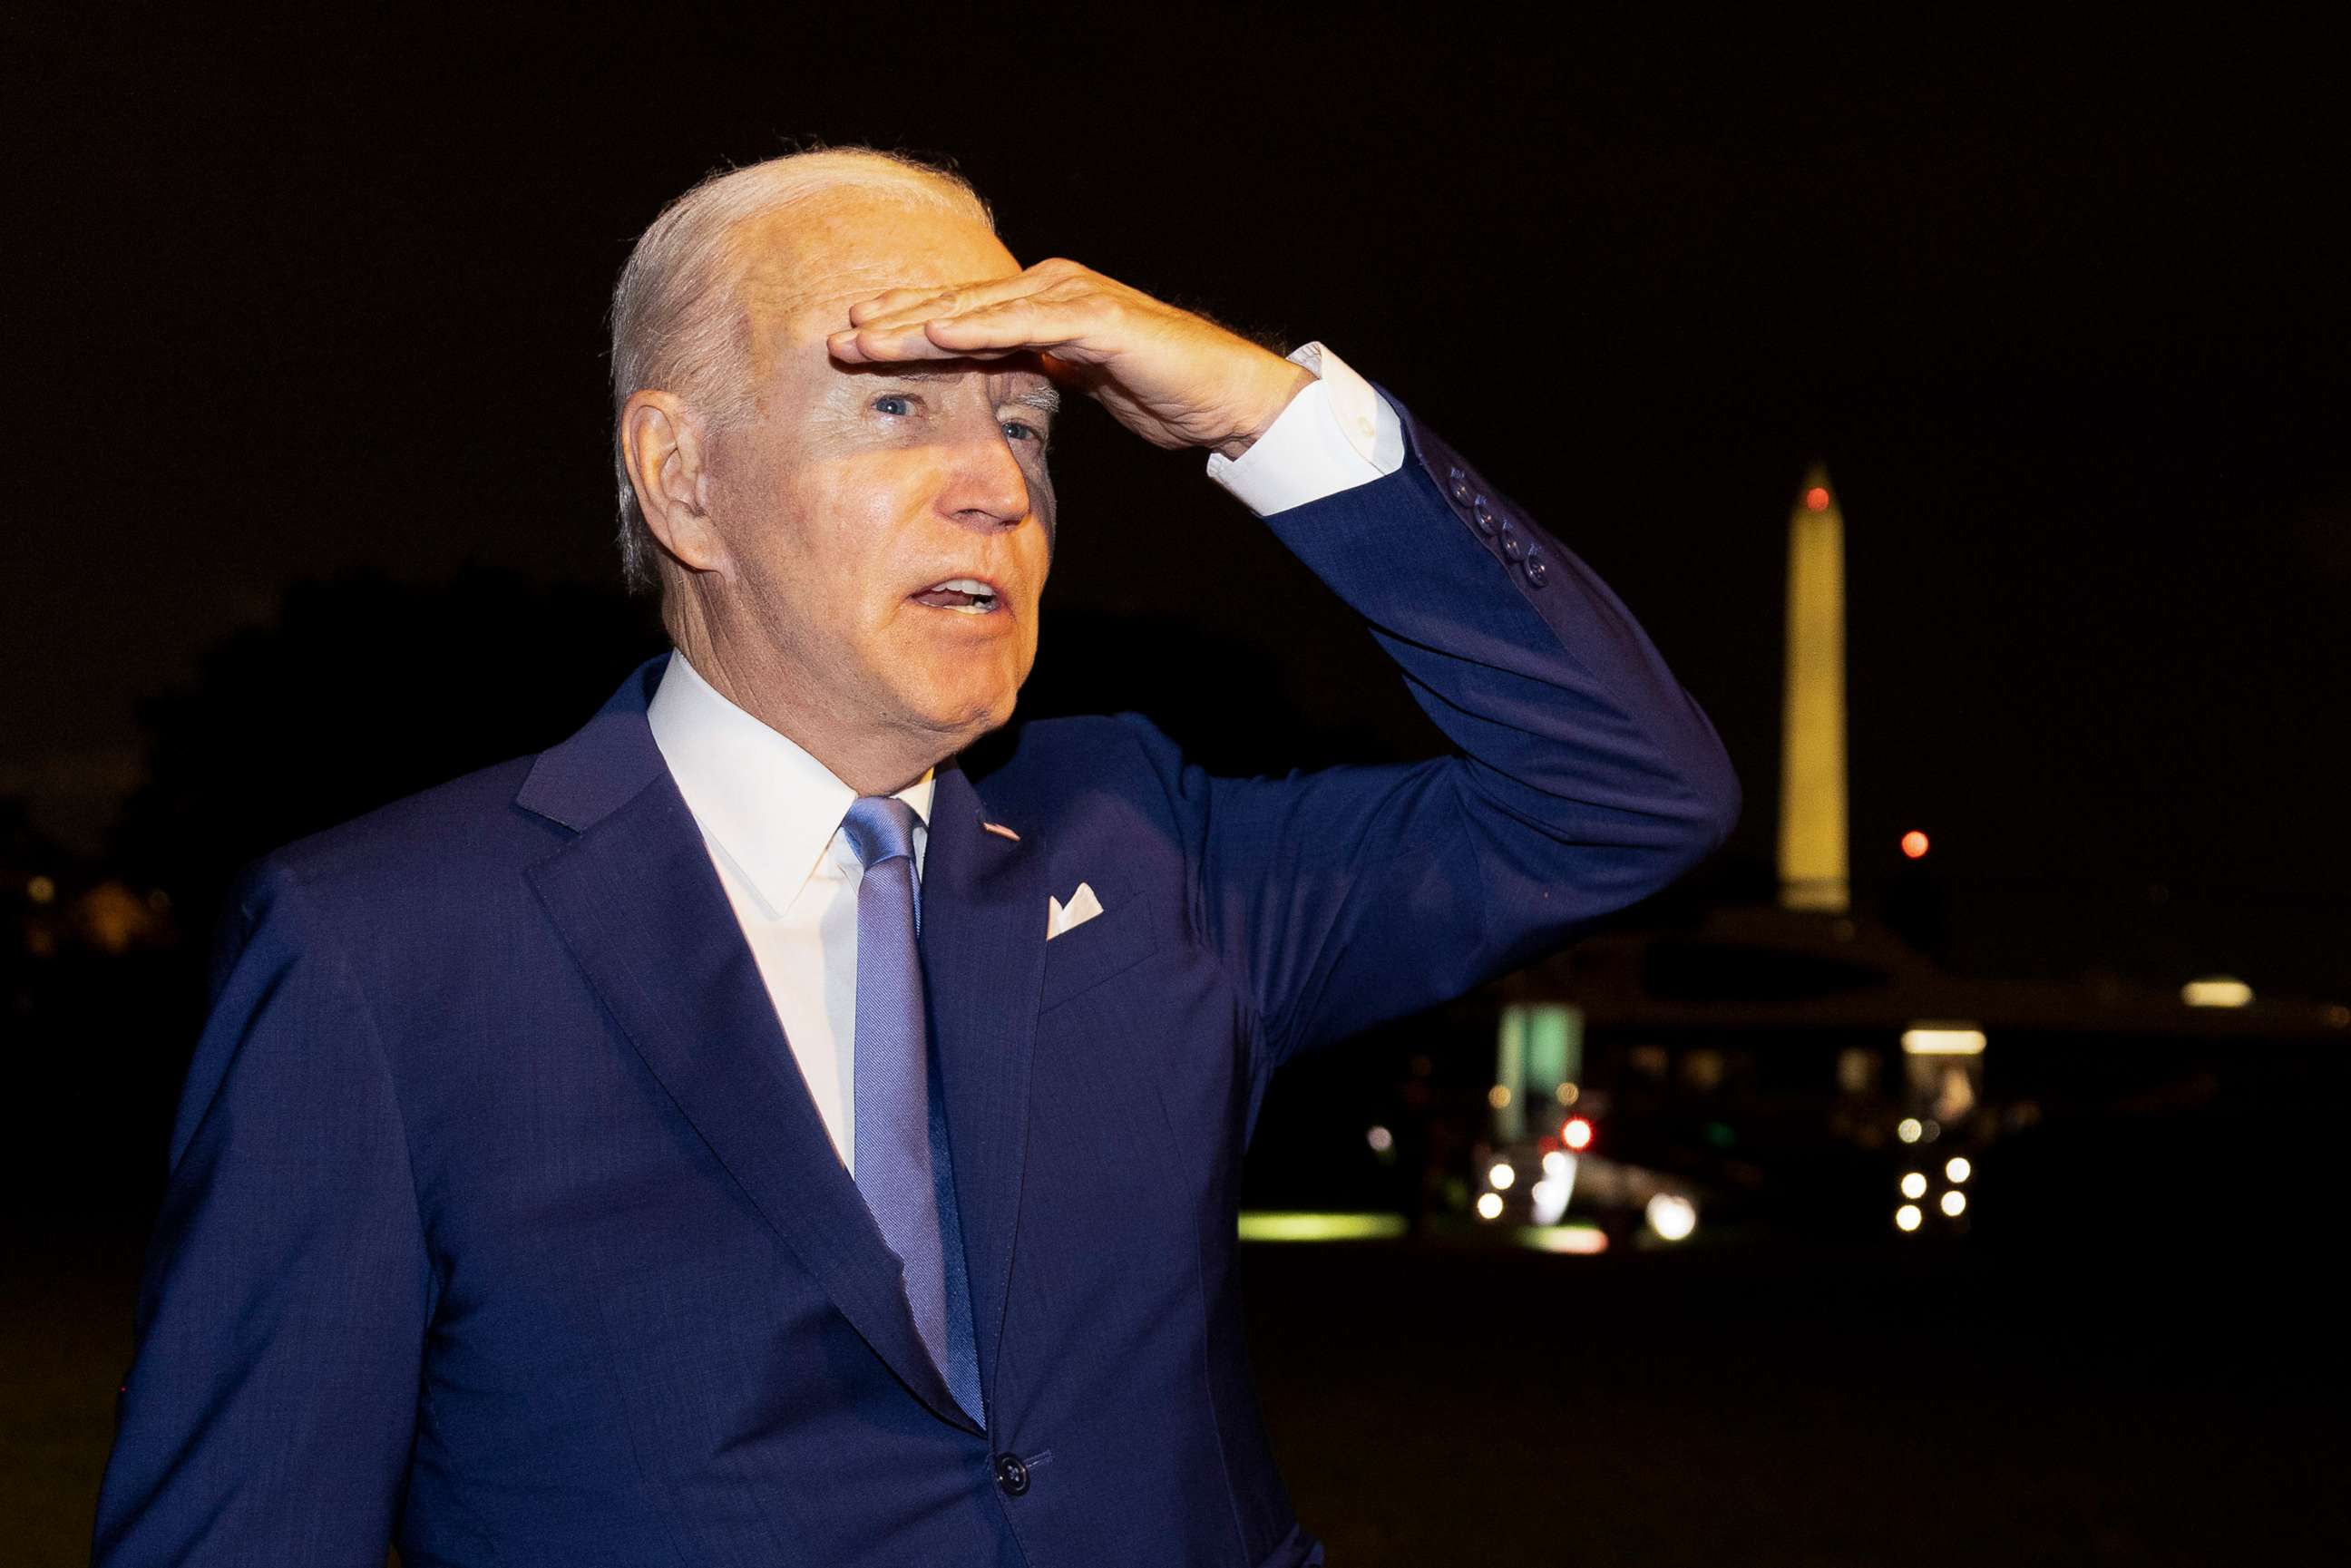 PHOTO: President Joe Biden takes reporters questions on the south lawn of the White House in Washington, July 16, 2022.